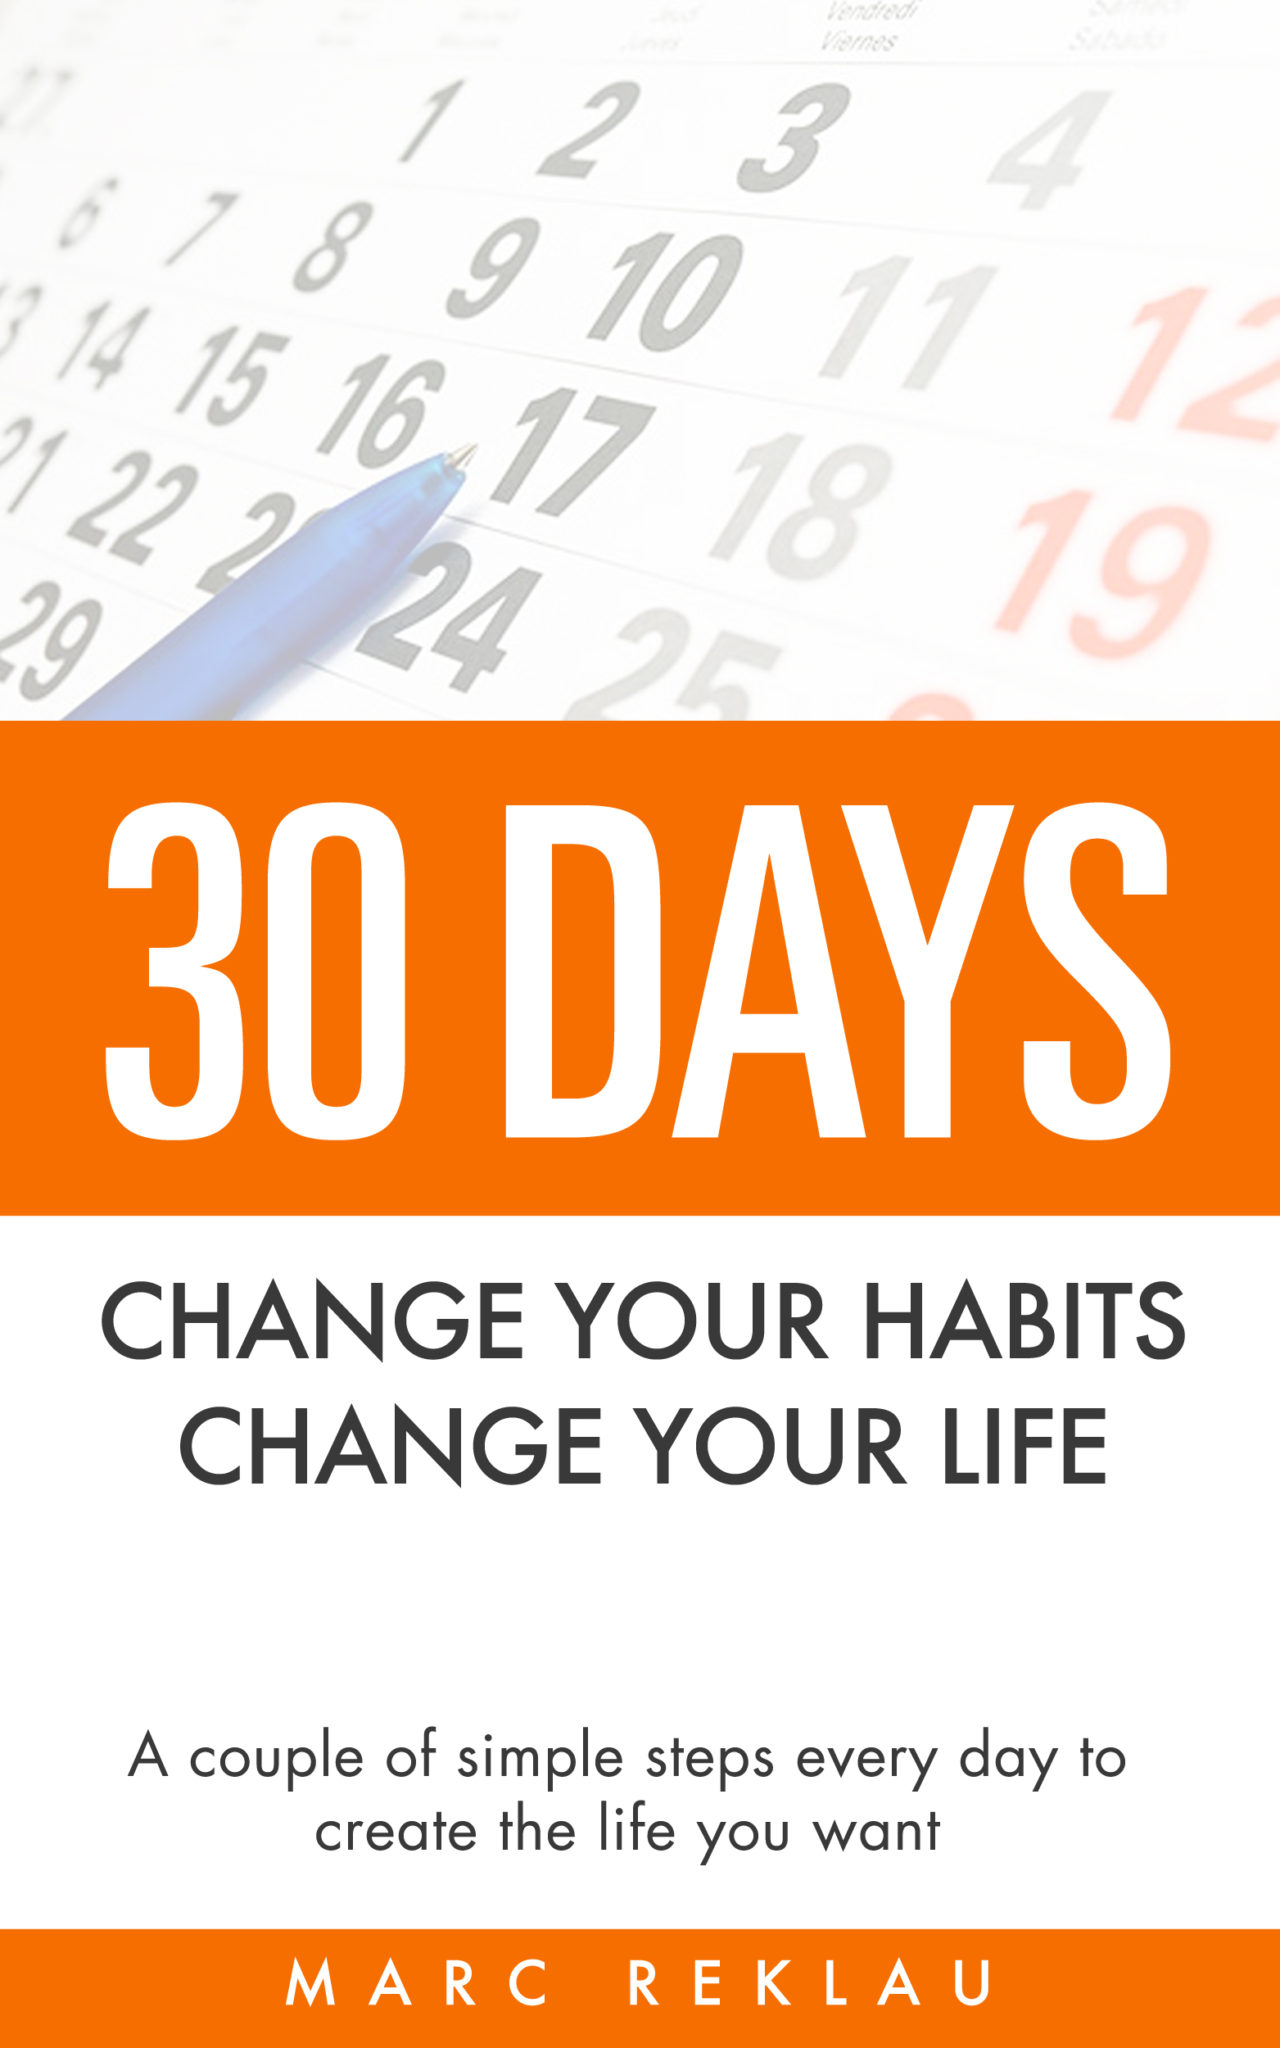 30 Days – Change your habits, Change your life by Marc Reklau